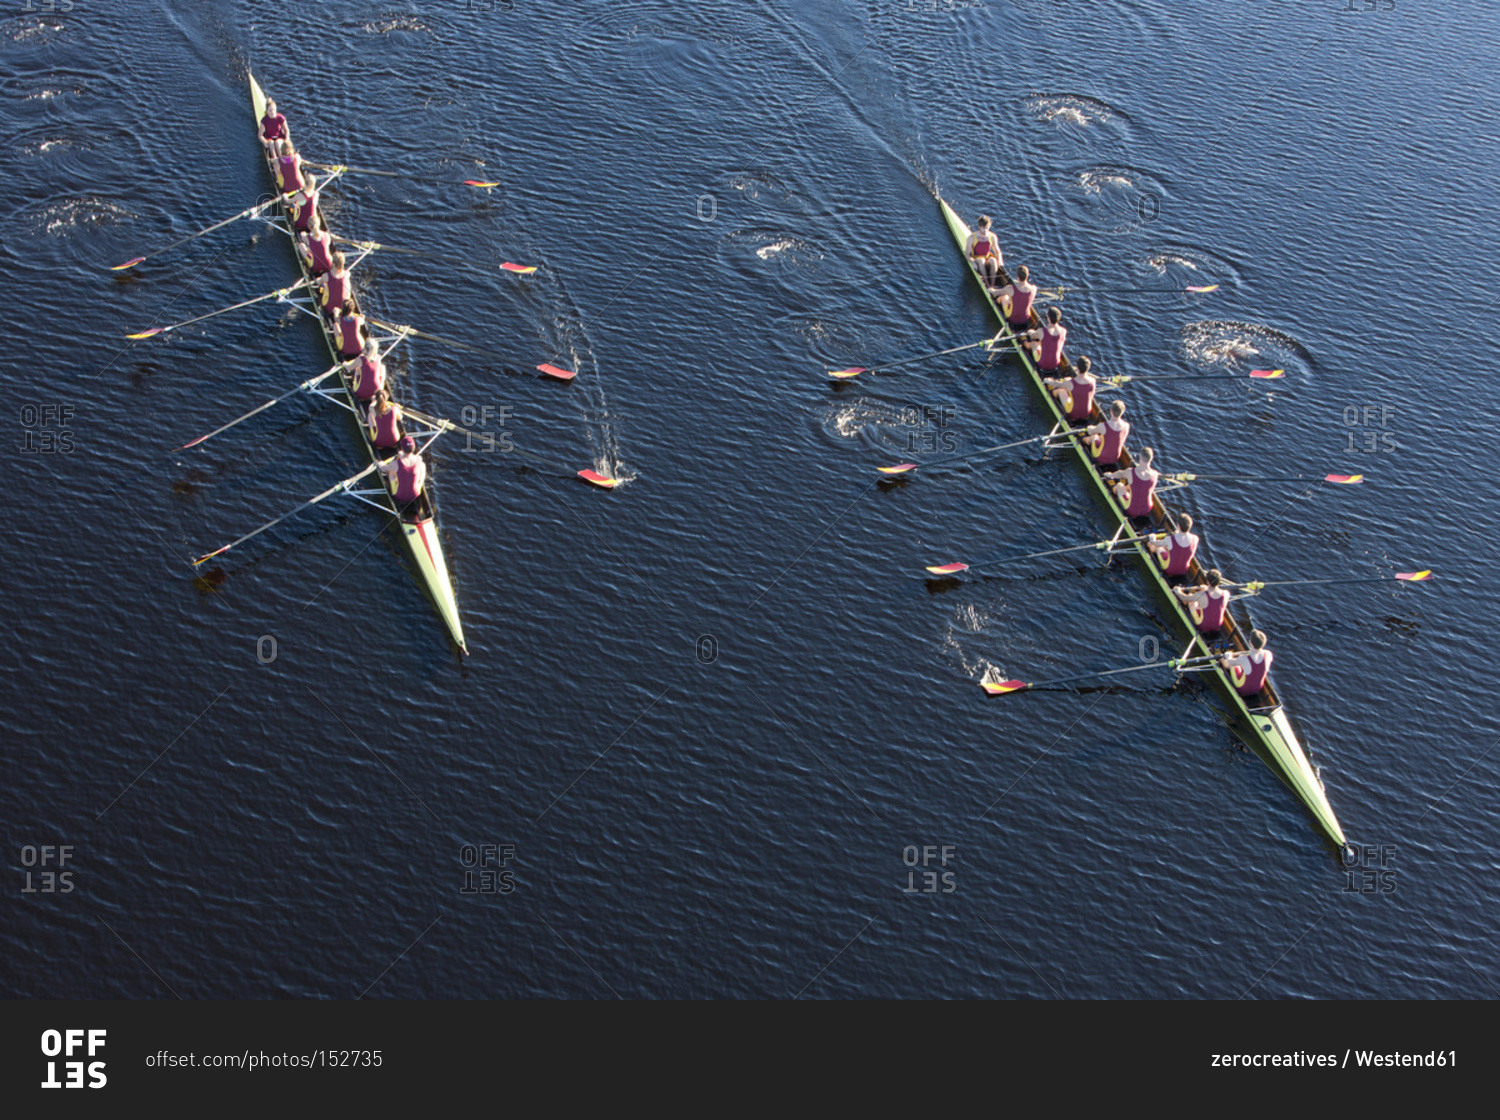 Above view of two rowing eights in water